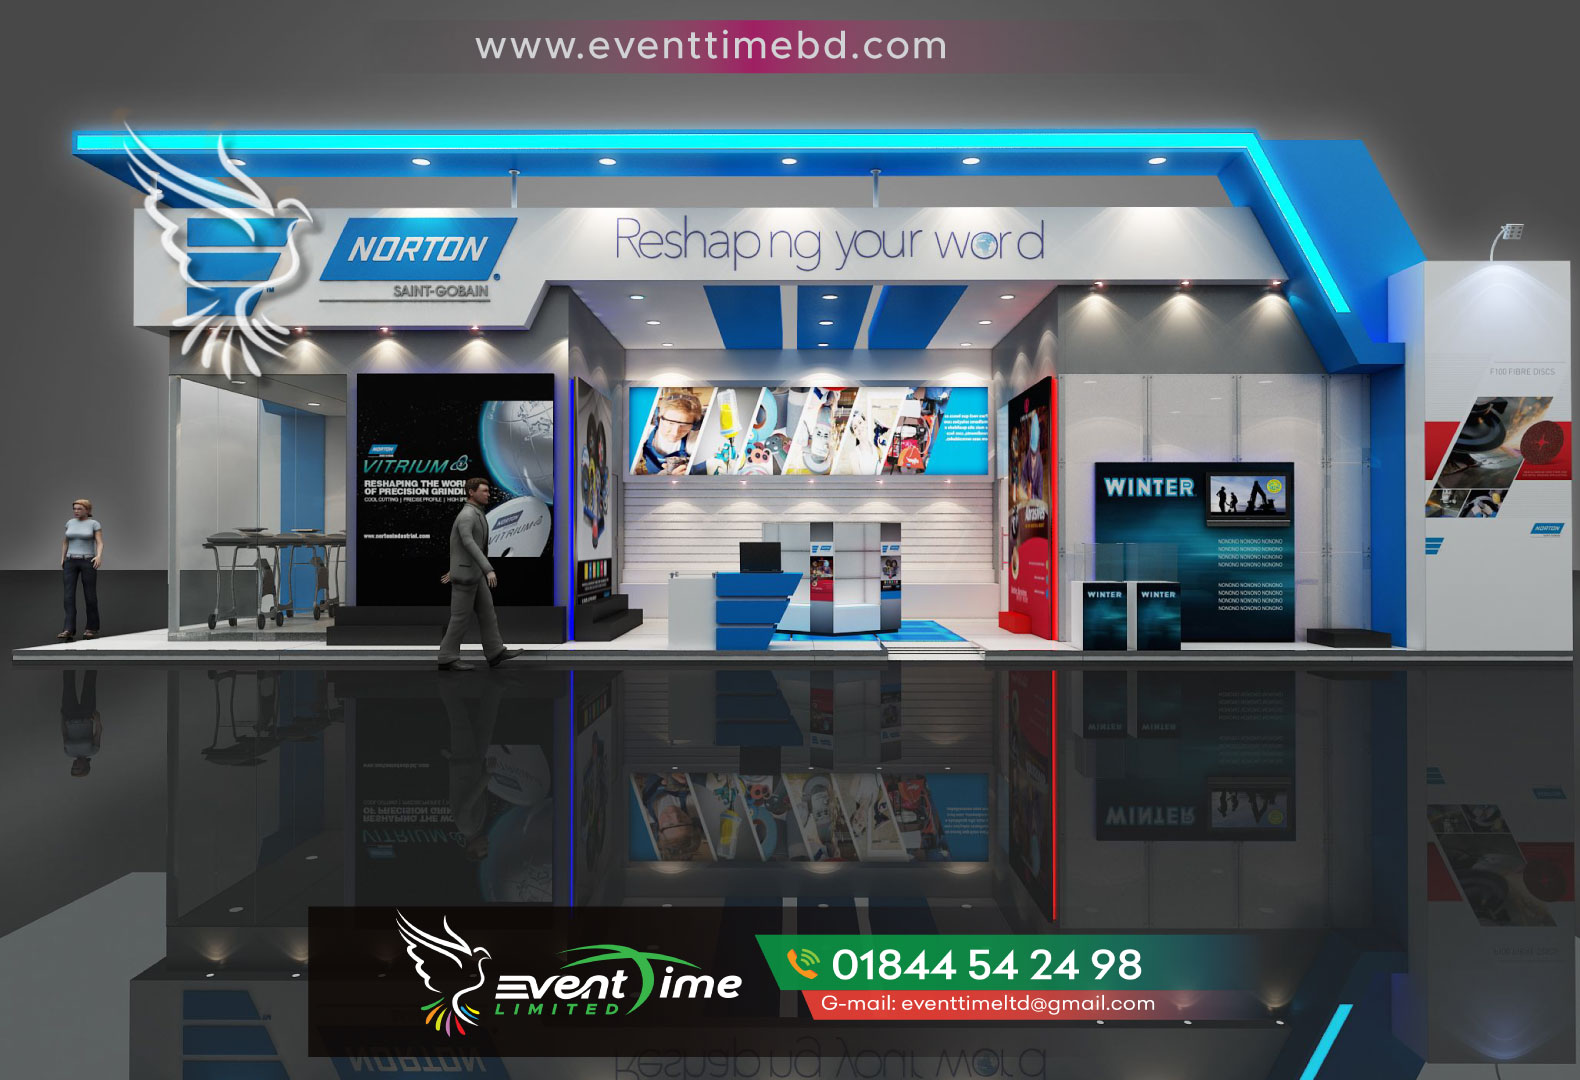 Best Exhibition Stand, Booth, Stall Interior Design Fabrication Services Exhibition Stall Design and Construction Company in Bangladesh We design and build exhibition stands that are custom creations, yet are reusable over all your events. To generate leads and sales at trade shows and conventions, you first have to get the attention of the attendees. That's where booth design makes the difference, especially in large shows with hundreds of exhibitors. The best trade show booth designs communicate your brand story both visually and graphically. Our expert designers recommend trade show booth ideas; materials and graphical messaging that tells your brand story with passion and purpose. From concept and floor layout, lighting arrangements, furniture décor, and eye-catching graphics; our design team has the experience, expertise, and creativity to translate your brand into an attention-grabbing display that exhibition attendees can't resist. Exhibition design is therefore not something you should take lightly. Getting the correct booth design is the key to a successful trade show event. If your exhibition stand design looks drab and uninviting, your customers will walk on by and visit your competitor's exhibition booth. To improve the general communication by creating an attractive and fluid atmosphere at the point of sale. Because it is important that the stall design manage to reflect not only the concept of the company but also its commercial objectives and its vision for the future. Our team is standing by ready to discuss any ideas you may have and help you bring your event to life! Exhibition Design is a key requirement in organizing your next exhibition trade show event. Yes, you can purchase off-the-shelf exhibition furniture - but will this engage your customers at your exhibition event? Exhibition design is the art of the exhibition booth designer. An exhibition stand designer delivers your marketing requirements for your next trade show stand. They then implement your exhibition project requirements into an exhibition design that is both highly impactful, yet fits in with your budgetary requirements. It takes experienced trade show builders to create a booth that will help you to win over your audience. So, it is crucial that you hire a trade show booth builder who is experienced at building exhibitions for clients in Bangladesh. Any stand designer who offers to build your booth at the cheapest rate will not necessarily execute your ideas for your booth with efficiency or accuracy. Don't skimp on its quality when developing your trade show booth design. Since it will heavily impact your brand perception at a trade show, ending up with a shabby or generic exhibition stand design is a sure way to not get blacklisted by industry professionals and attendees at the fair you're planning to participate in. Through the design stands we intend to achieve an attractive and functional environment at the same time. Especially companies like Event Time BD, our job is to facilitate the design according to the commercial objectives of the company, brand and the target audience. Because the visitor who usually goes to the fair or event is very specific in what he is looking for. The stall design must guarantee a unique image of the exhibiting organization, so the visual messages must be clear and direct. The exhibited product or the brand represented design must stall out from the rest of the competition. Give it the love it deserves. In the design stands we also carry out an architectural study of the space to be exhibited. We study the objective public and the adjacent stands. It is also very important to know the location of the stand; it is not the same in the main corridor or entrance as being located in a corner of the fairgrounds or conference center. It is always basic before contracting a stall design that you have prepared all the strategy to participate in the fair, trade show, congress, event, and exhibition, cause it is necessary to have studied the actions and elements that the Pre-Fair requirements, goals and objectives. Therefore, choose the best team. For example - the potential market, production and supply capacity. In addition to determining a sufficient and well located stand space. After that we elaborate a budget, publicity and promotion and finally contact with potential clients. Exhibition stall design has to be economical and affordable. It is no use if the Event Time BD exhibition stand designer creates a stunning stand which is totally unaffordable and breaks your marketing budget. Subject to your available budget our exhibition booth designers will deliver exhibition stall designs that which fulfills your original project design brief. Event Time BD stall designers will balance the final specification to get an exhibition design on budget. Maybe some small exhibition stall features or details will have to be sacrificed - allowing the overall exhibition scheme to be delivered. This way the client gets the high impact exhibition stall design concept originally presented, exhibition designs which are affordable, keeping the trade fair marketing project on budget. Our exhibition stand builders can then deliver the stall design concept into a reality. Large areas of glass like office windows look great - but are very heavy and delicate to install. Maybe a similar look and feel can be achieved using alternative exhibition stand design techniques.Stall Exhibition Stand Fabrication Bangladesh Event Time BD is Providing all kind Stall Exhibition Stand Fabrication Bangladesh. SS Top Letter Feeling Station Acrylic 3D Letter Led Light Branding in Dhaka Bangladesh. We Provide Acrylic top Letter LED Sign 3D Sign Letter Arrow Sign Board. Project Led sign board neon sign board ss sign board name plate board led display board acp board boarding acrylic top letter ss top letter aluminum profile box backlit sign board bill board led light neon light shop sign board Lighting sign board tube light neon signage. Stall Exhibition Stand Fabrication Bangladesh Fair Stall Making & Branding in Dhaka Bangladesh In Bangladesh, exhibition stand fabrication is an important industry. Many businesses rely on the exhibition stand fabricators to create custom stands for their products and services. Stand fabricators in Bangladesh have a lot of experience and expertise in the industry. They use the latest technologies and equipment to create high-quality stands. They also have a team of skilled workers who can create custom designs. Best Exhibition Stand Booth Stall Interior Design in Bangladesh 1. At first glance, exhibition stand fabrication in Bangladesh may seem like a daunting task. 2. However, with a little bit of research and planning, it can be a relatively easy and stress-free process. 3. Here are five tips to help you get started on your exhibition stand fabrication project in Bangladesh: 1. Do your research: Be sure to research various fabricators in Bangladesh before making your final decision. 2. Get quotes: Once you have shortlisted a few fabricators, be sure to get quotes from each of them. 3. Review portfolios: Another important factor to consider is the portfolio of work that each fabricator has. 4. ask for references: Finally, don’t forget to ask for references from each of the fabricators you are considering. 5. Make your decision: Once you have gathered all the information, you can then make an informed decision about which fabricator to use. 1. Do your research: Be sure to research various fabricators in Bangladesh before making your final decision. When it comes to exhibiting stands, fabricators in Bangladesh offer a variety of options to choose from. It is important to do your research and compare different fabricators in order to find the best one for your specific needs. Keep in mind that the cheapest option is not always the best one – be sure to consider the quality of the materials and the overall service before making your final decision. When you are trying to find the right stall exhibition stand fabricator in Bangladesh, it is important to get quotes from a few different companies. This will allow you to see who is the most affordable and who can provide the best quality product. Be sure to ask each company for a quote in writing so that you can compare them side by side. It is also important to ask about the turnaround time and any other special requirements that you may have. Some companies may require a deposit before they begin work, so be sure to ask about that as well. You don’t want to end up paying for a stall exhibition stand that you’re not happy with, so be sure to ask as many questions as you can. The more you know, the better your chances of finding the right fabricator for your needs. Best Exhibition Stand Stall Interior Design Fabrication Services exhibition stalls stalls exhibition fair fair stal stal trade fair and exhibition trade fair trade fair and exhibition Stand builders in Dhaka Exhibition Stall Fabrication exhibition & event Exhibition Stall for Rent Exhibition Stand Fabrication Bangladesh Best Exhibition Stall Designer Company in Dhaka, Bangladesh Exhibition Stall Design and Creative Stall Design Exhibition Stand / Booth / Stall Interior Exhibition stall fabricators interior design in Dhaka, Bangladesh exhibition stand design and fabrication Bangladesh Exhibition stall Designer and fabrication Dhaka Bangladesh Exhibition Stall Interior Design Service in Dhaka 24 Best exhibition stall Services To Buy Online 40 Exhibition Stall Design ideas Exhibition Stall Design Projects Fair Stall Making & Branding Best Exhibition Stand - Booth - Stall Interior Design Designing Exhibition Stall Design, For Trade Fair, Pan Exhibition Stall Design in Bangladesh Best Exhibition Stall Designer Company in Dhaka, Bangladesh Exhibition Stall Design in Bangladesh EXHIBITION STALL DESIGN AND FABRICATION Exhibition Stall Design and Creative Best Exhibition Stand, Booth, Stall Interior Design simple stall design exhibition stall design ideas stall designer stall design images creative stall design wooden stall design 3d stall design exhibition stall design ideas simple stall design creative stall design stall design images stall designer exhibition stalls exhibition stall design and fabrication exhibition stall design 3d model free download exhibition stall design tds rate exhibition stall design company in delhi exhibition stall design pdf exhibition stall design company in mumbai exhibition stall design behance exhibition stall design in delhi exhibition stall design in ahmedabad 3 side open exhibition stall design 2 side open exhibition stall design 4 side open exhibition stall design one side open exhibition stall design behance exhibition stall design jewellery exhibition stall design 3d exhibition stall design free download creative exhibition stall design food exhibition stall design simple exhibition stall design exhibition stall designer in mumbai exhibition stall designer in delhi exhibition stall designer in ahmedabad exhibition stall designers in bangalore fair stall meaning fair stall price fair stall synonym fair stall meaning fair stall synonym fair stall price exhibition stall design exhibition stall design ideas simple stall design fair stall ideas fair stall decoration ideas fair stall hire fair stall design fair stall decorations fair stall games fair stall signs fair stall price fair stall costs christmas fair stall ideas summer fair stall ideas rschool fair stall ideas fun fair stall ideas school christmas fair stall ideas trade fair stall booking price 2022 living north christmas fair